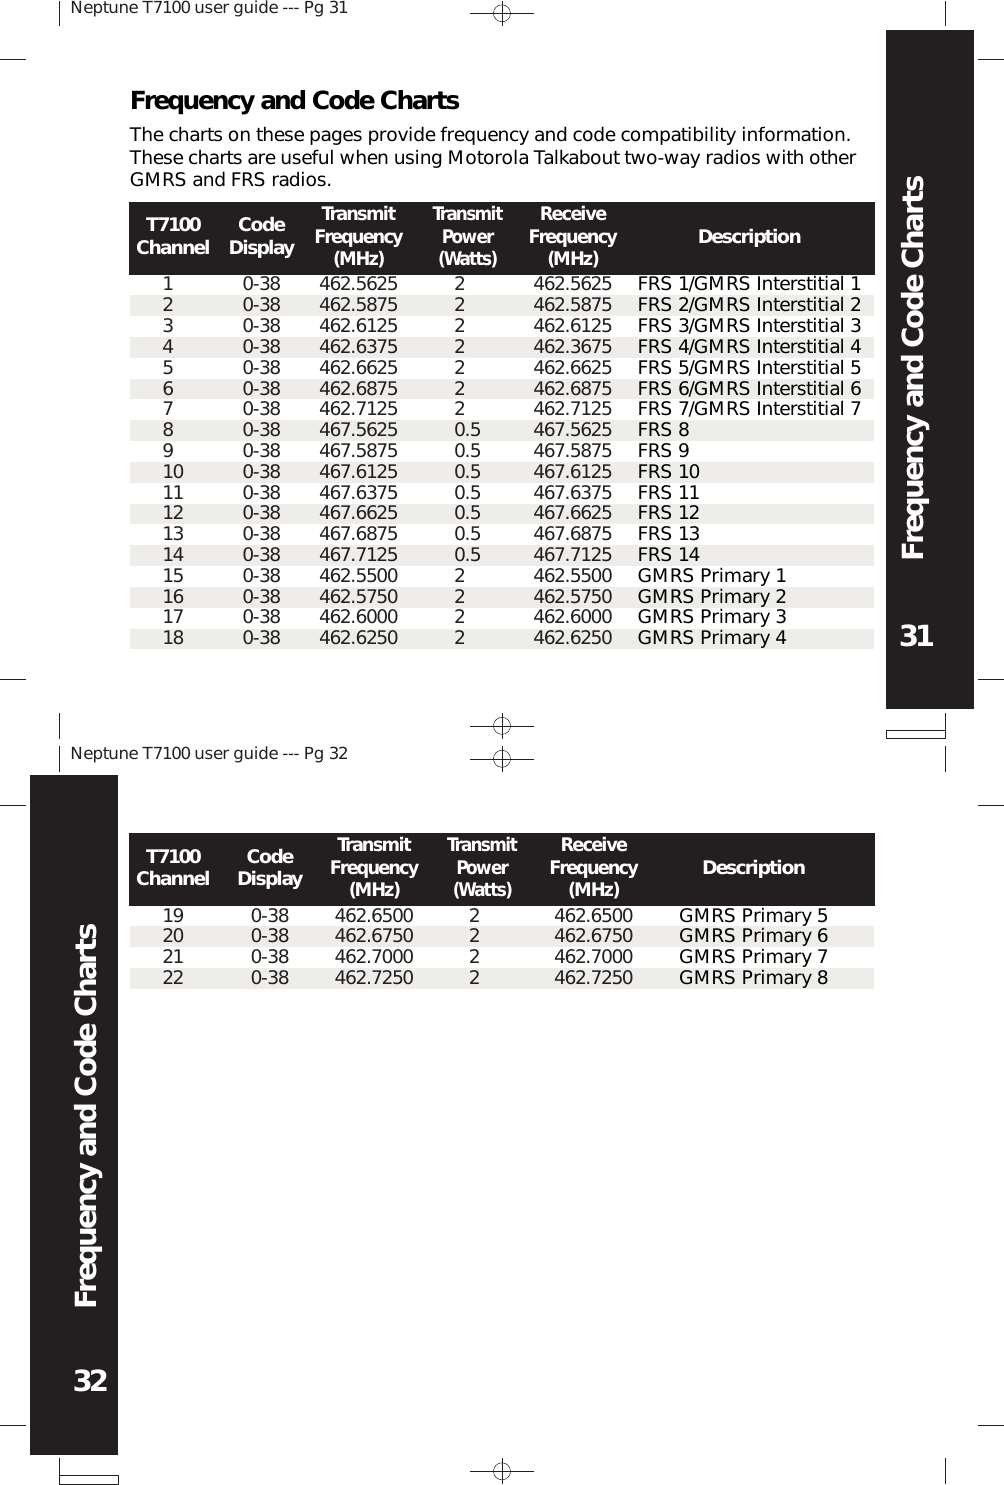 Neptune T7100 user guide --- Pg 3131Frequency and Code ChartsNeptune T7100 user guide --- Pg 3232Frequency and Code ChartsFrequency and Code ChartsThe charts on these pages provide frequency and code compatibility information.These charts are useful when using Motorola Talkabout two-way radios with otherGMRS and FRS radios.T7100Channel123456789101112131415161718TransmitFrequency(MHz)462.5625462.5875462.6125462.6375462.6625462.6875462.7125467.5625467.5875467.6125467.6375467.6625467.6875467.7125462.5500462.5750462.6000462.6250TransmitPower(Watts)22222220.50.50.50.50.50.50.52222ReceiveFrequency(MHz)462.5625462.5875462.6125462.3675462.6625462.6875462.7125467.5625467.5875467.6125467.6375467.6625467.6875467.7125462.5500462.5750462.6000462.6250DescriptionFRS 1/GMRS Interstitial 1FRS 2/GMRS Interstitial 2FRS 3/GMRS Interstitial 3FRS 4/GMRS Interstitial 4FRS 5/GMRS Interstitial 5FRS 6/GMRS Interstitial 6FRS 7/GMRS Interstitial 7FRS 8FRS 9FRS 10FRS 11FRS 12FRS 13FRS 14GMRS Primary 1GMRS Primary 2GMRS Primary 3GMRS Primary 4CodeDisplay0-380-380-380-380-380-380-380-380-380-380-380-380-380-380-380-380-380-38T7100Channel19202122CodeDisplay0-380-380-380-38TransmitFrequency(MHz)462.6500462.6750462.7000462.7250TransmitPower(Watts)2222DescriptionGMRS Primary 5GMRS Primary 6GMRS Primary 7GMRS Primary 8ReceiveFrequency(MHz)462.6500462.6750462.7000462.7250